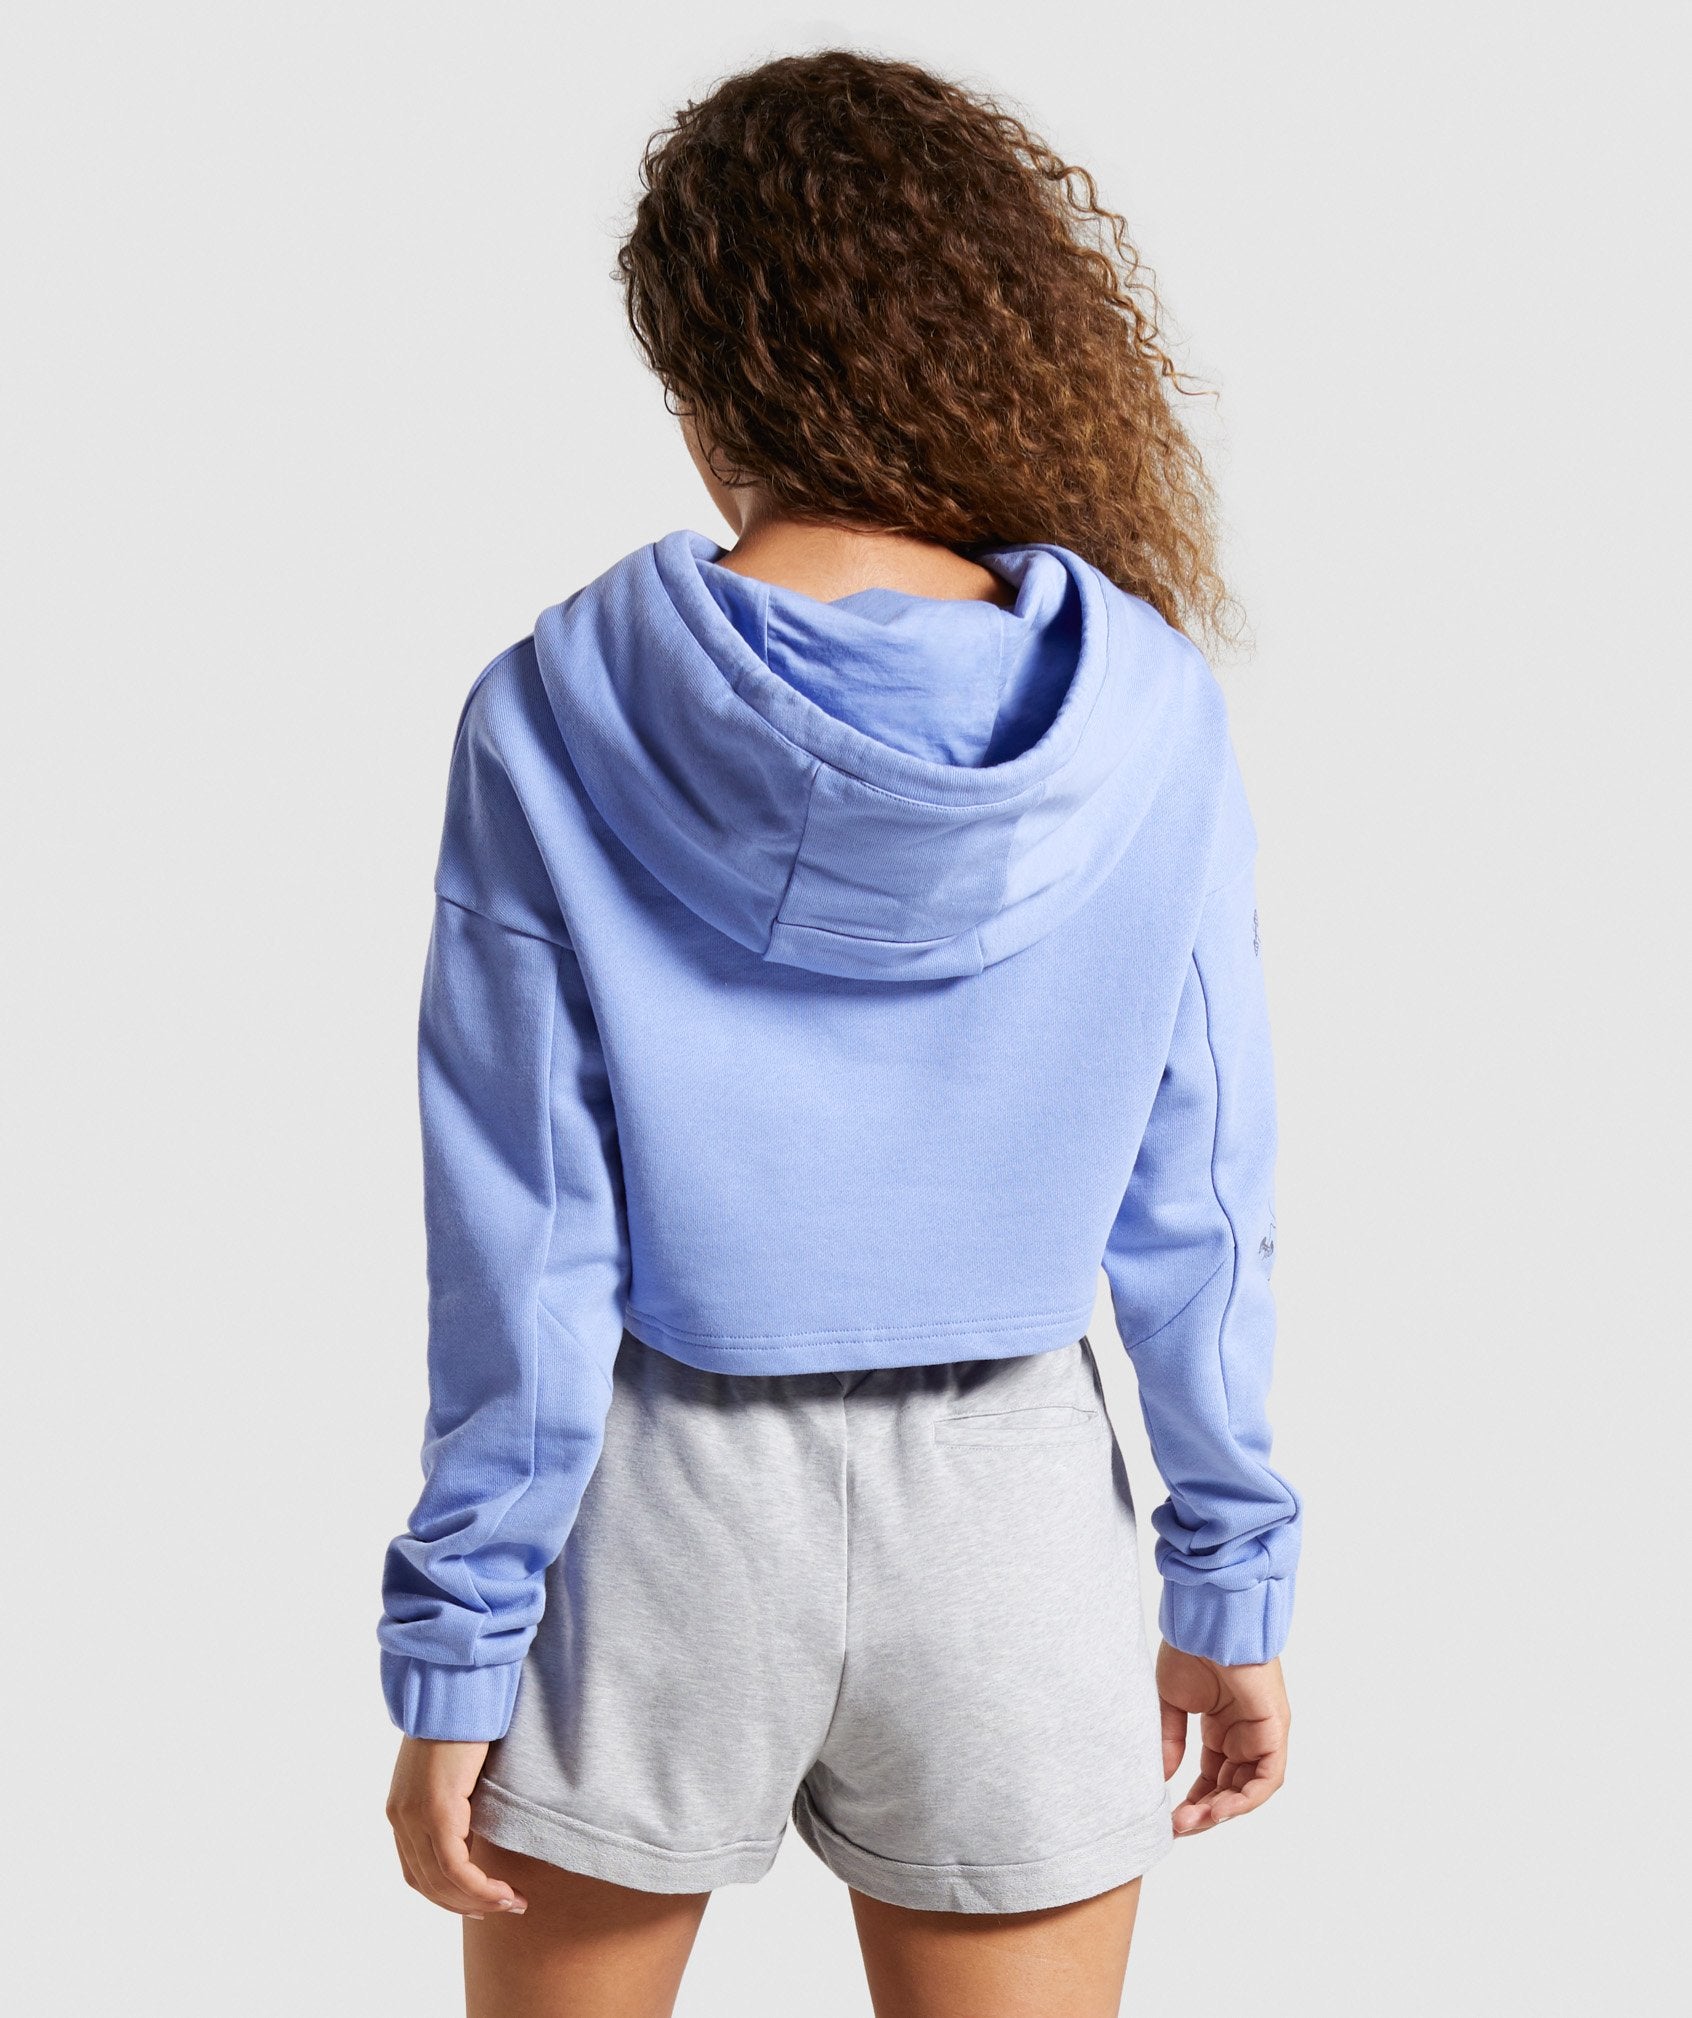 Roots Hoodie in Light Blue - view 2